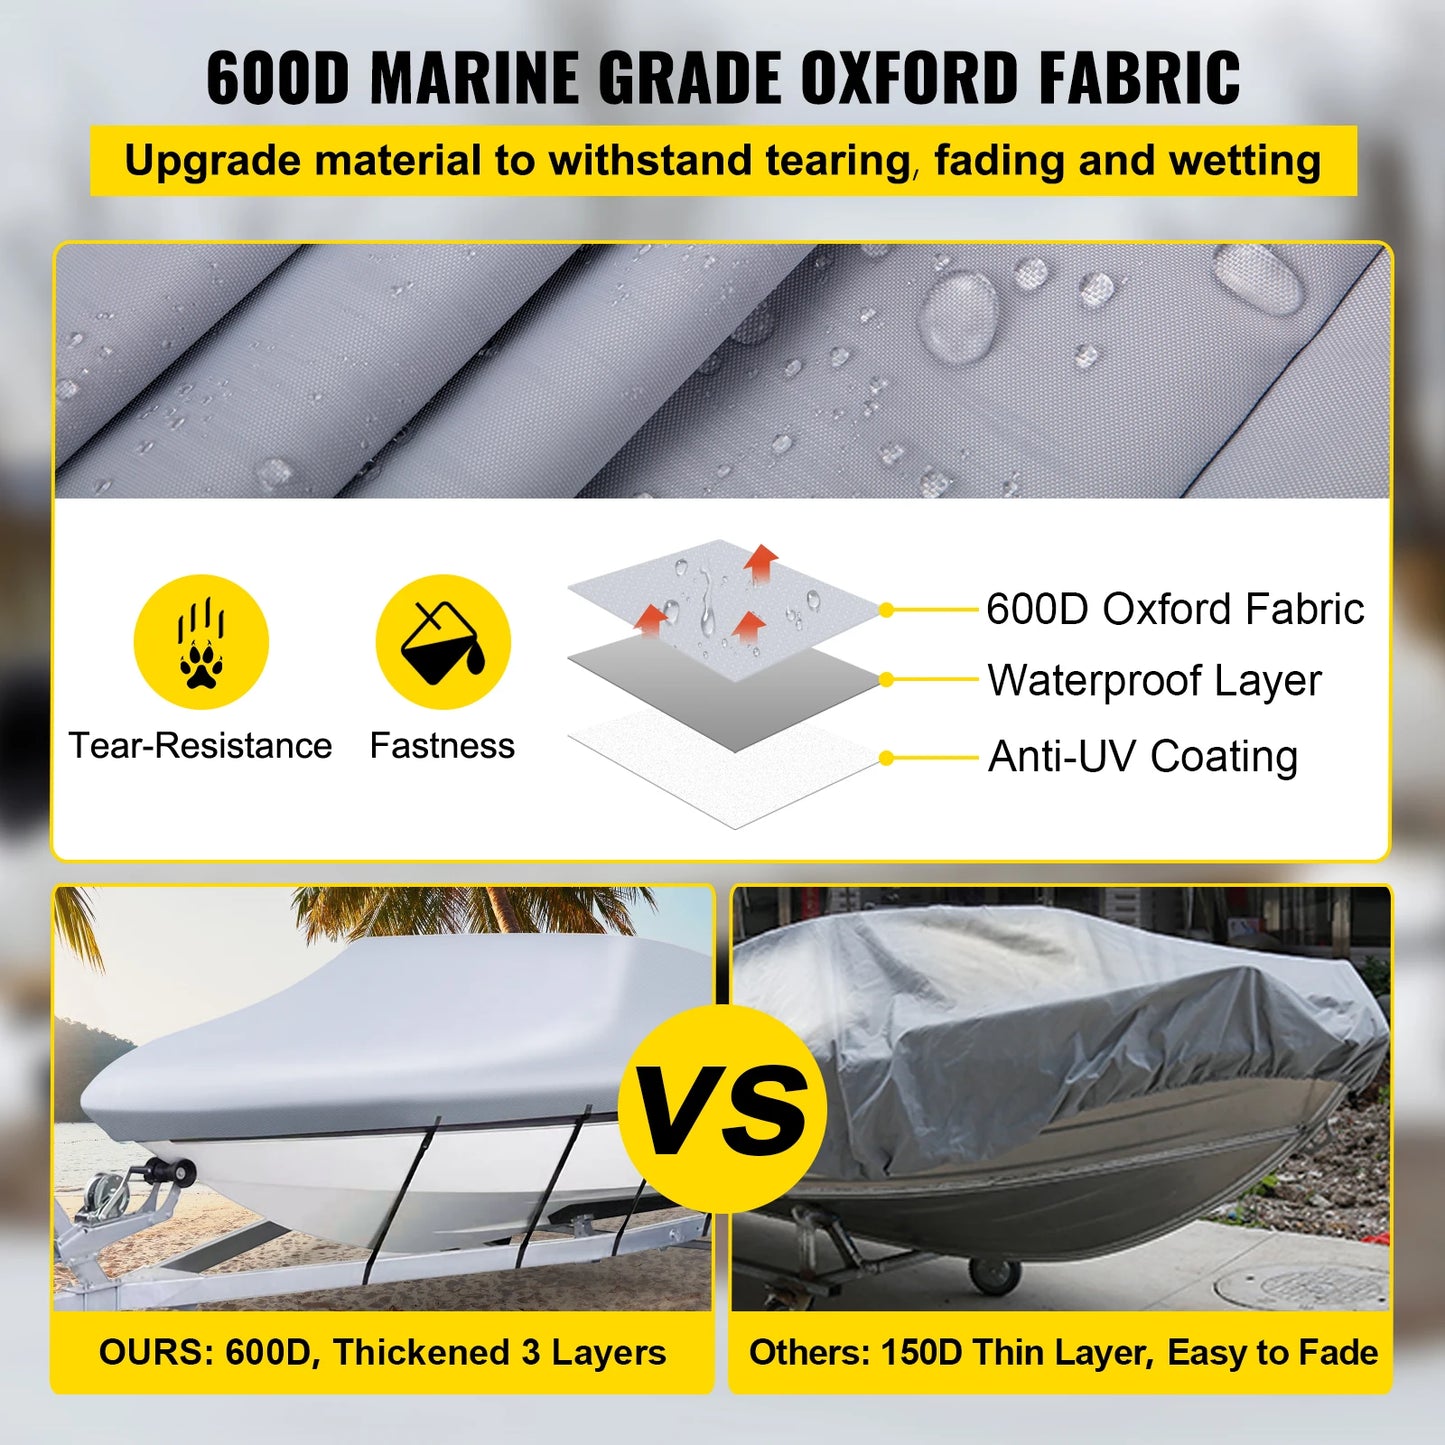 14-28 FT V Hull Boat Cover 3 Layer Oxford Fabric